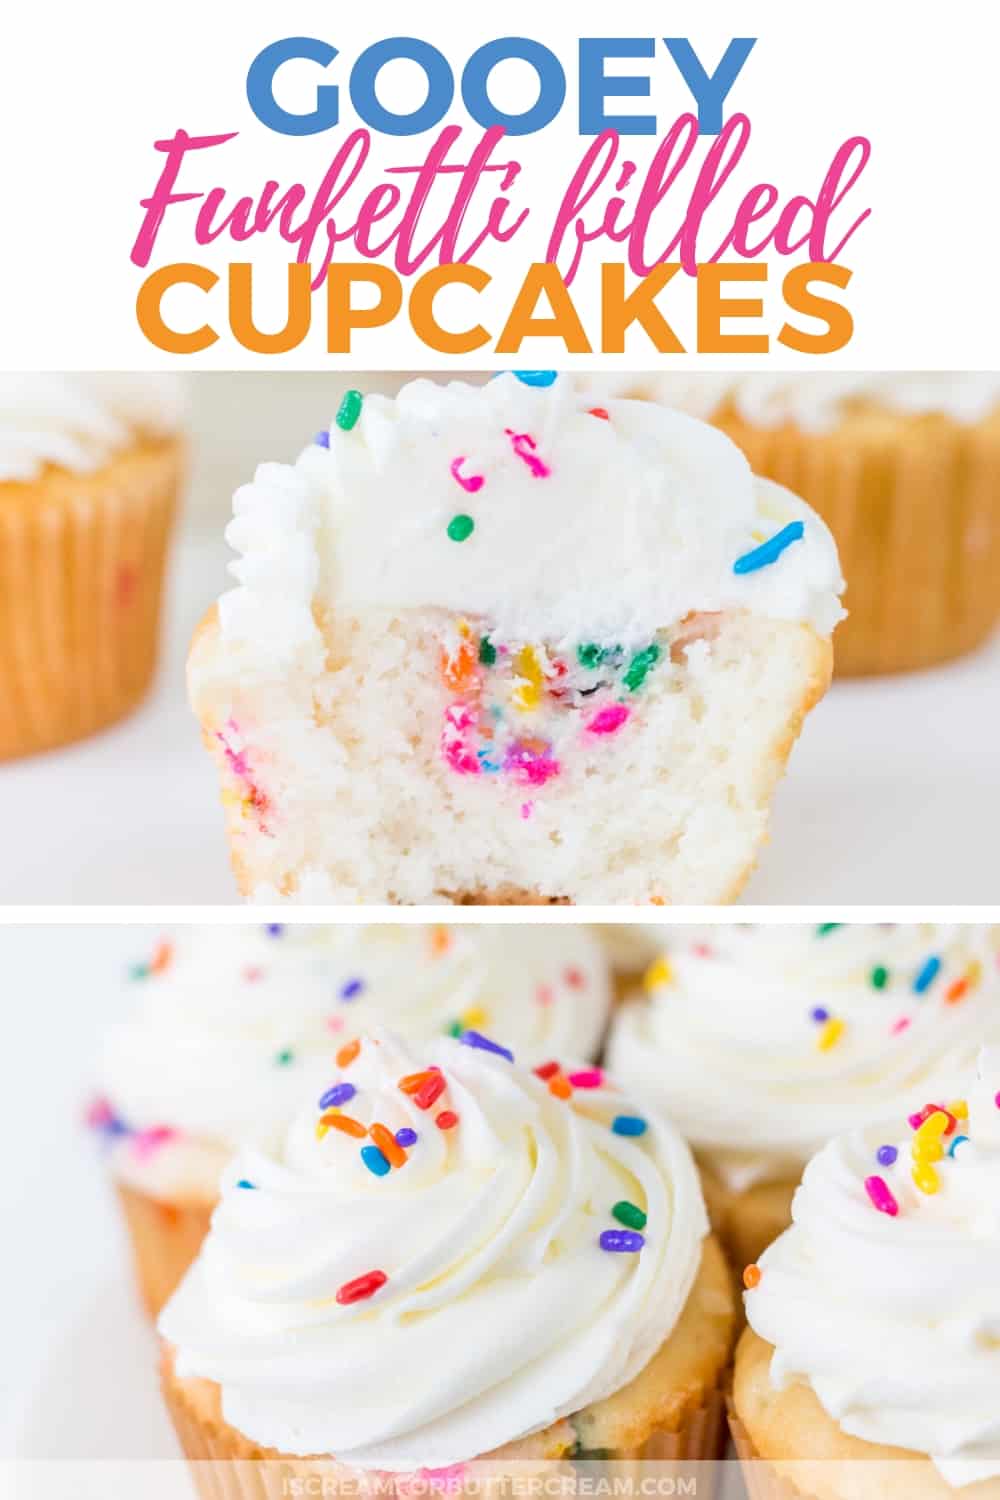 Gooey Funfetti Filled Cupcakes New Pinterest Graphic 2